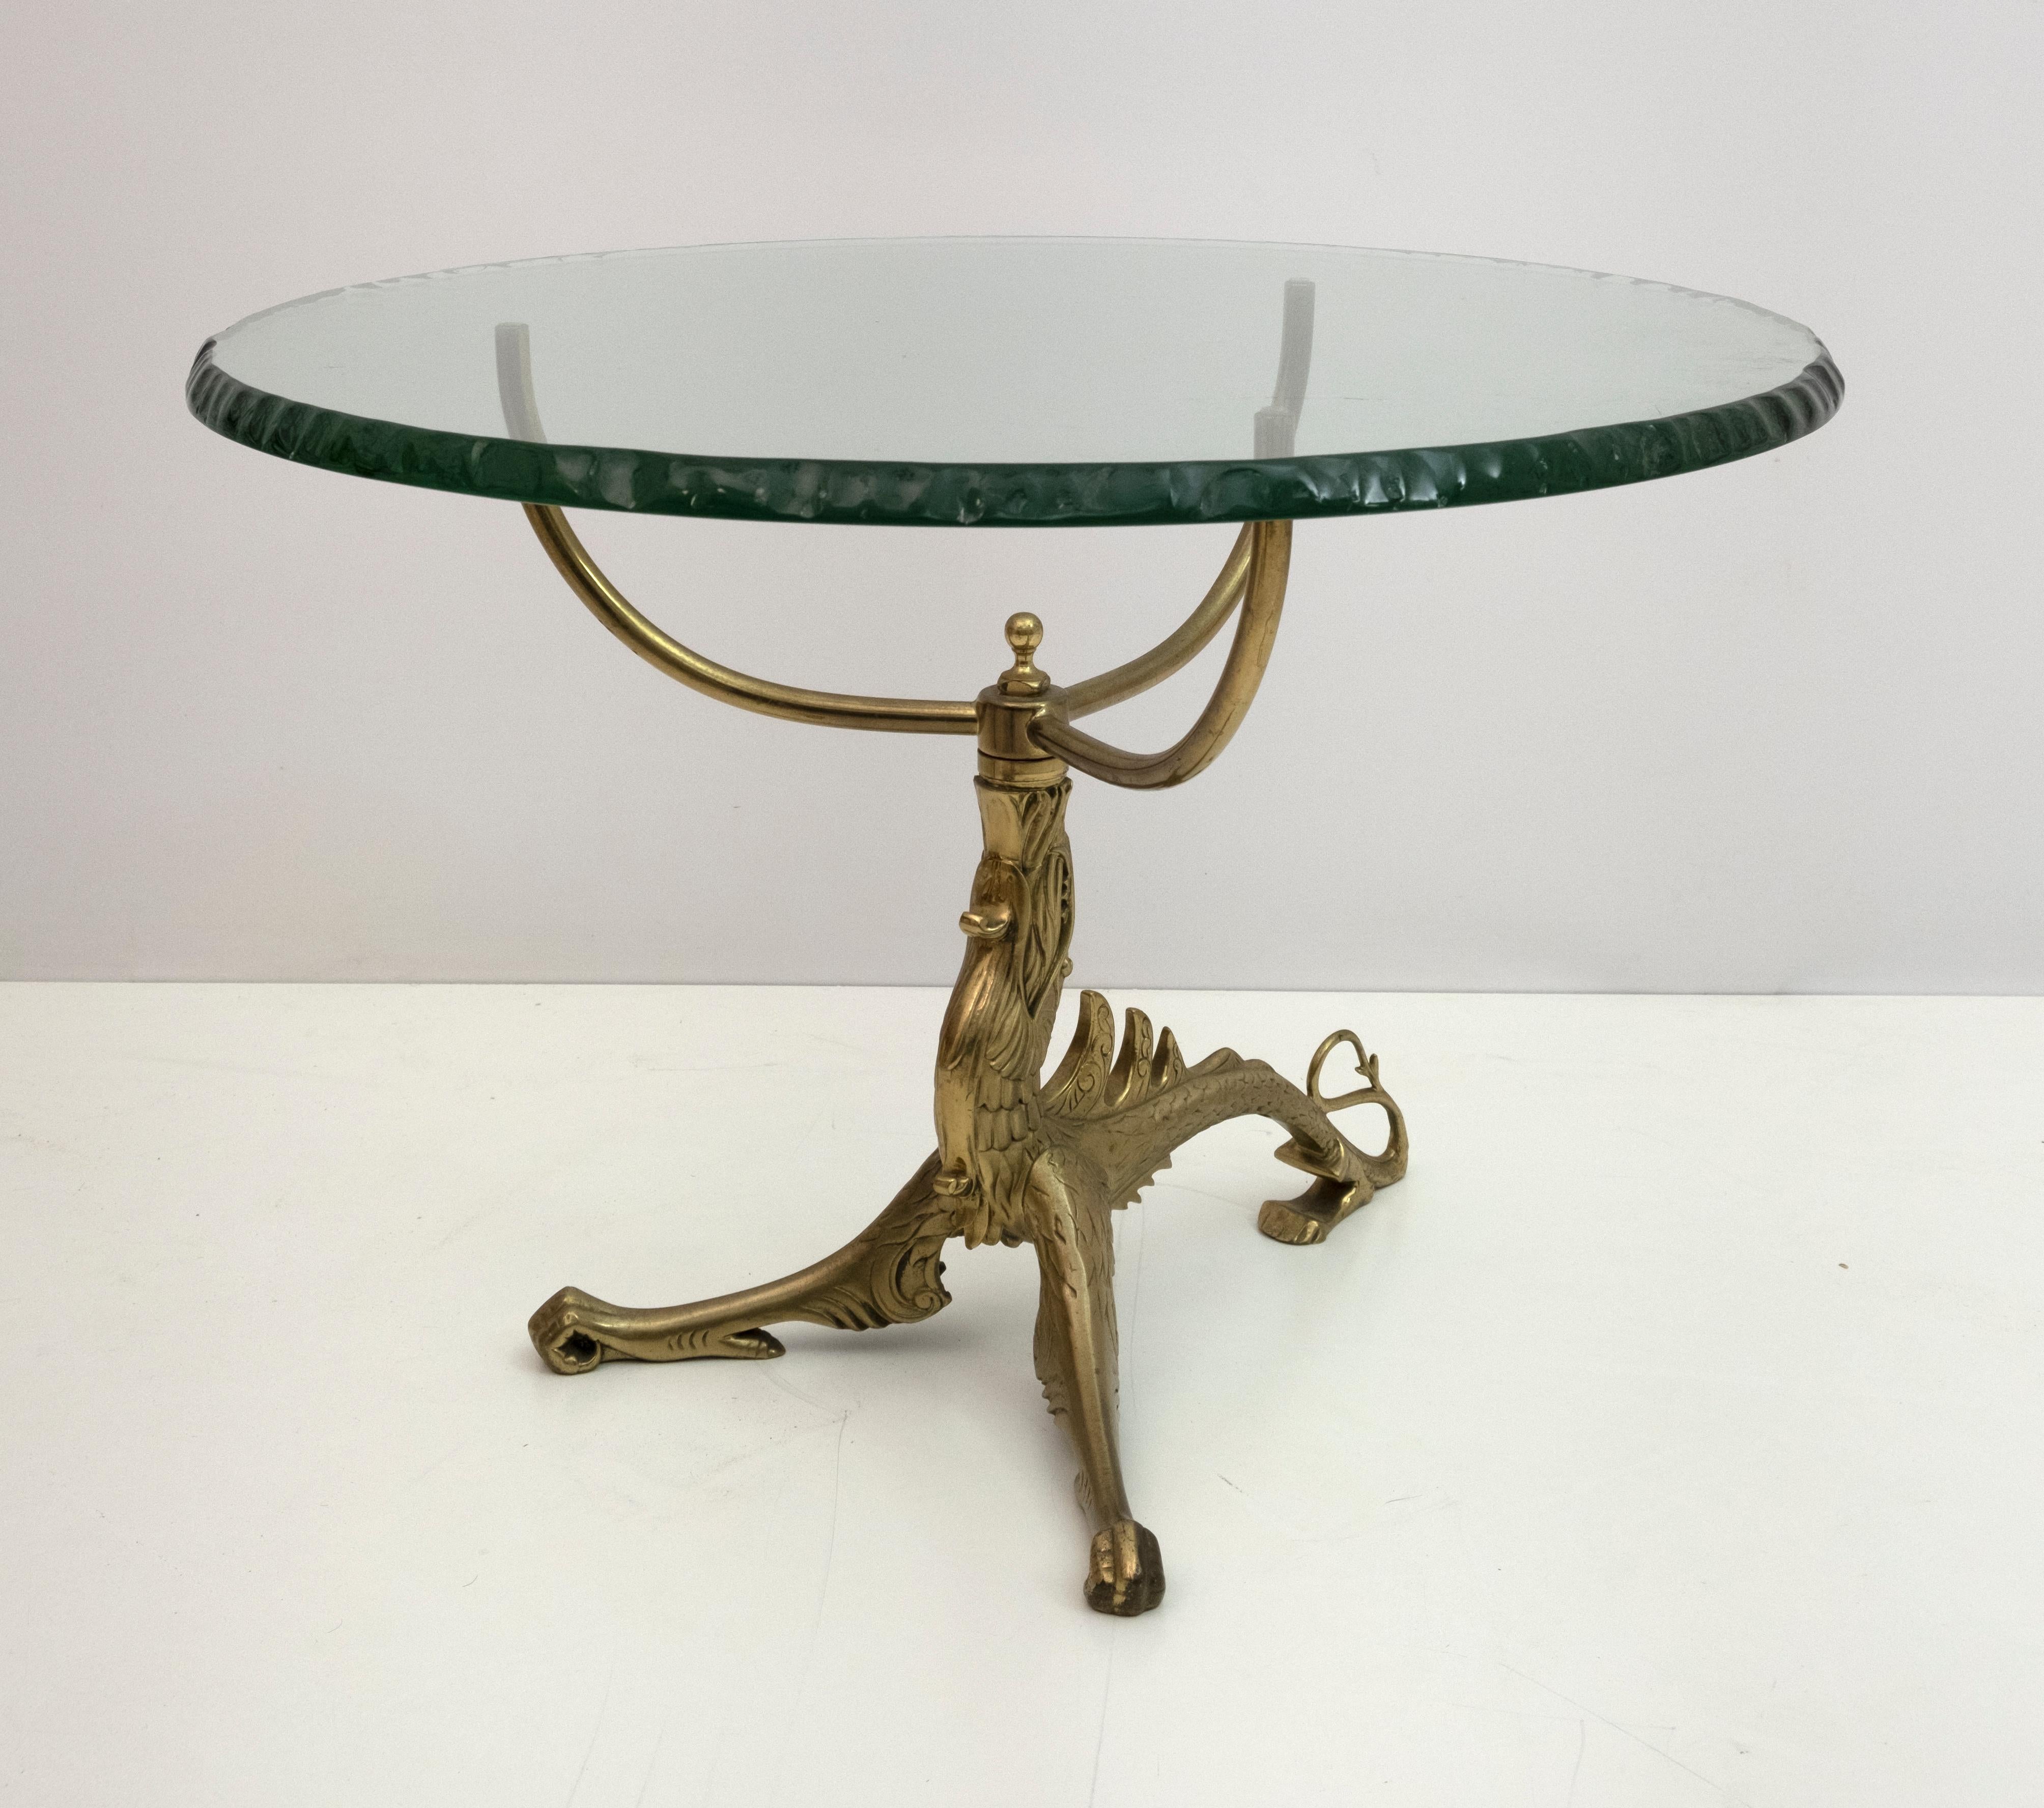 This Empire style coffee table, has as a base a gilded bronze casting, lost wax casting, depicting a dragon, the glass top has a thickness of two centimeters, the edge is hand chiseled, glass from the famous French company Saint-Gobain.

